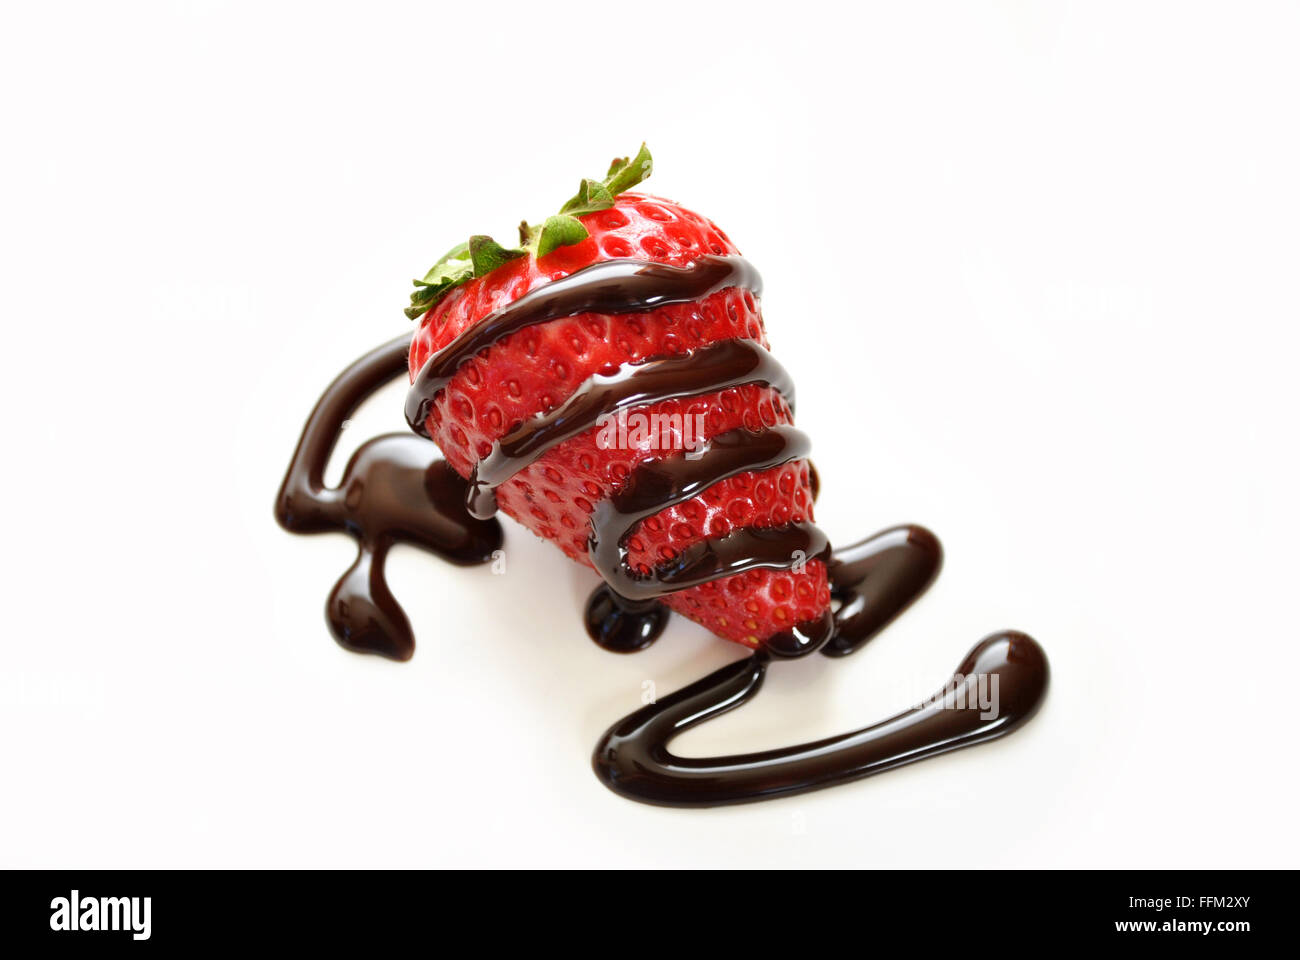 Fresh Strawberry Drizzled with Chocolate Sauce Stock Photo